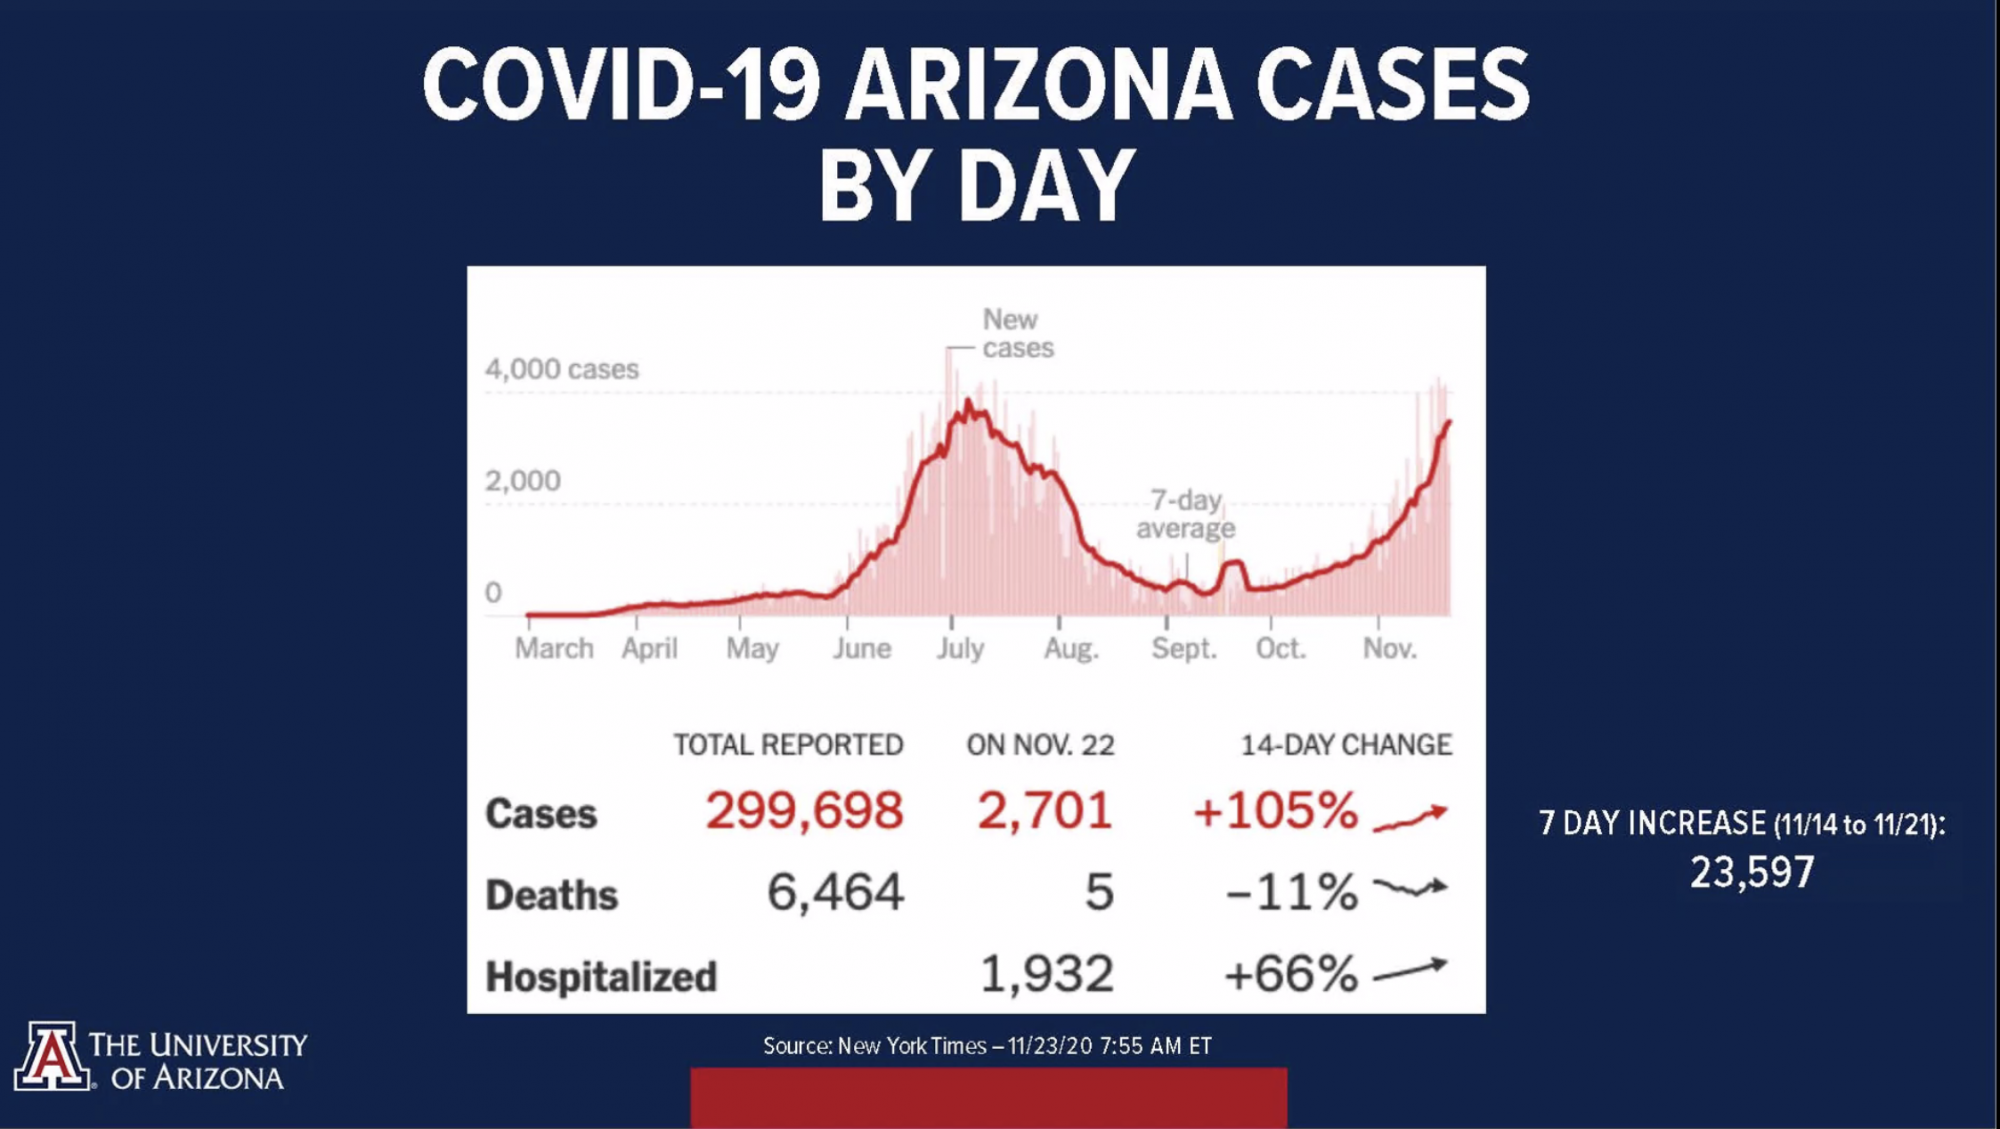 Screenshot from the Nov. 23 reentry press conference, during which the task force discussed the increasing number of COVID-19 cases in the past few weeks.